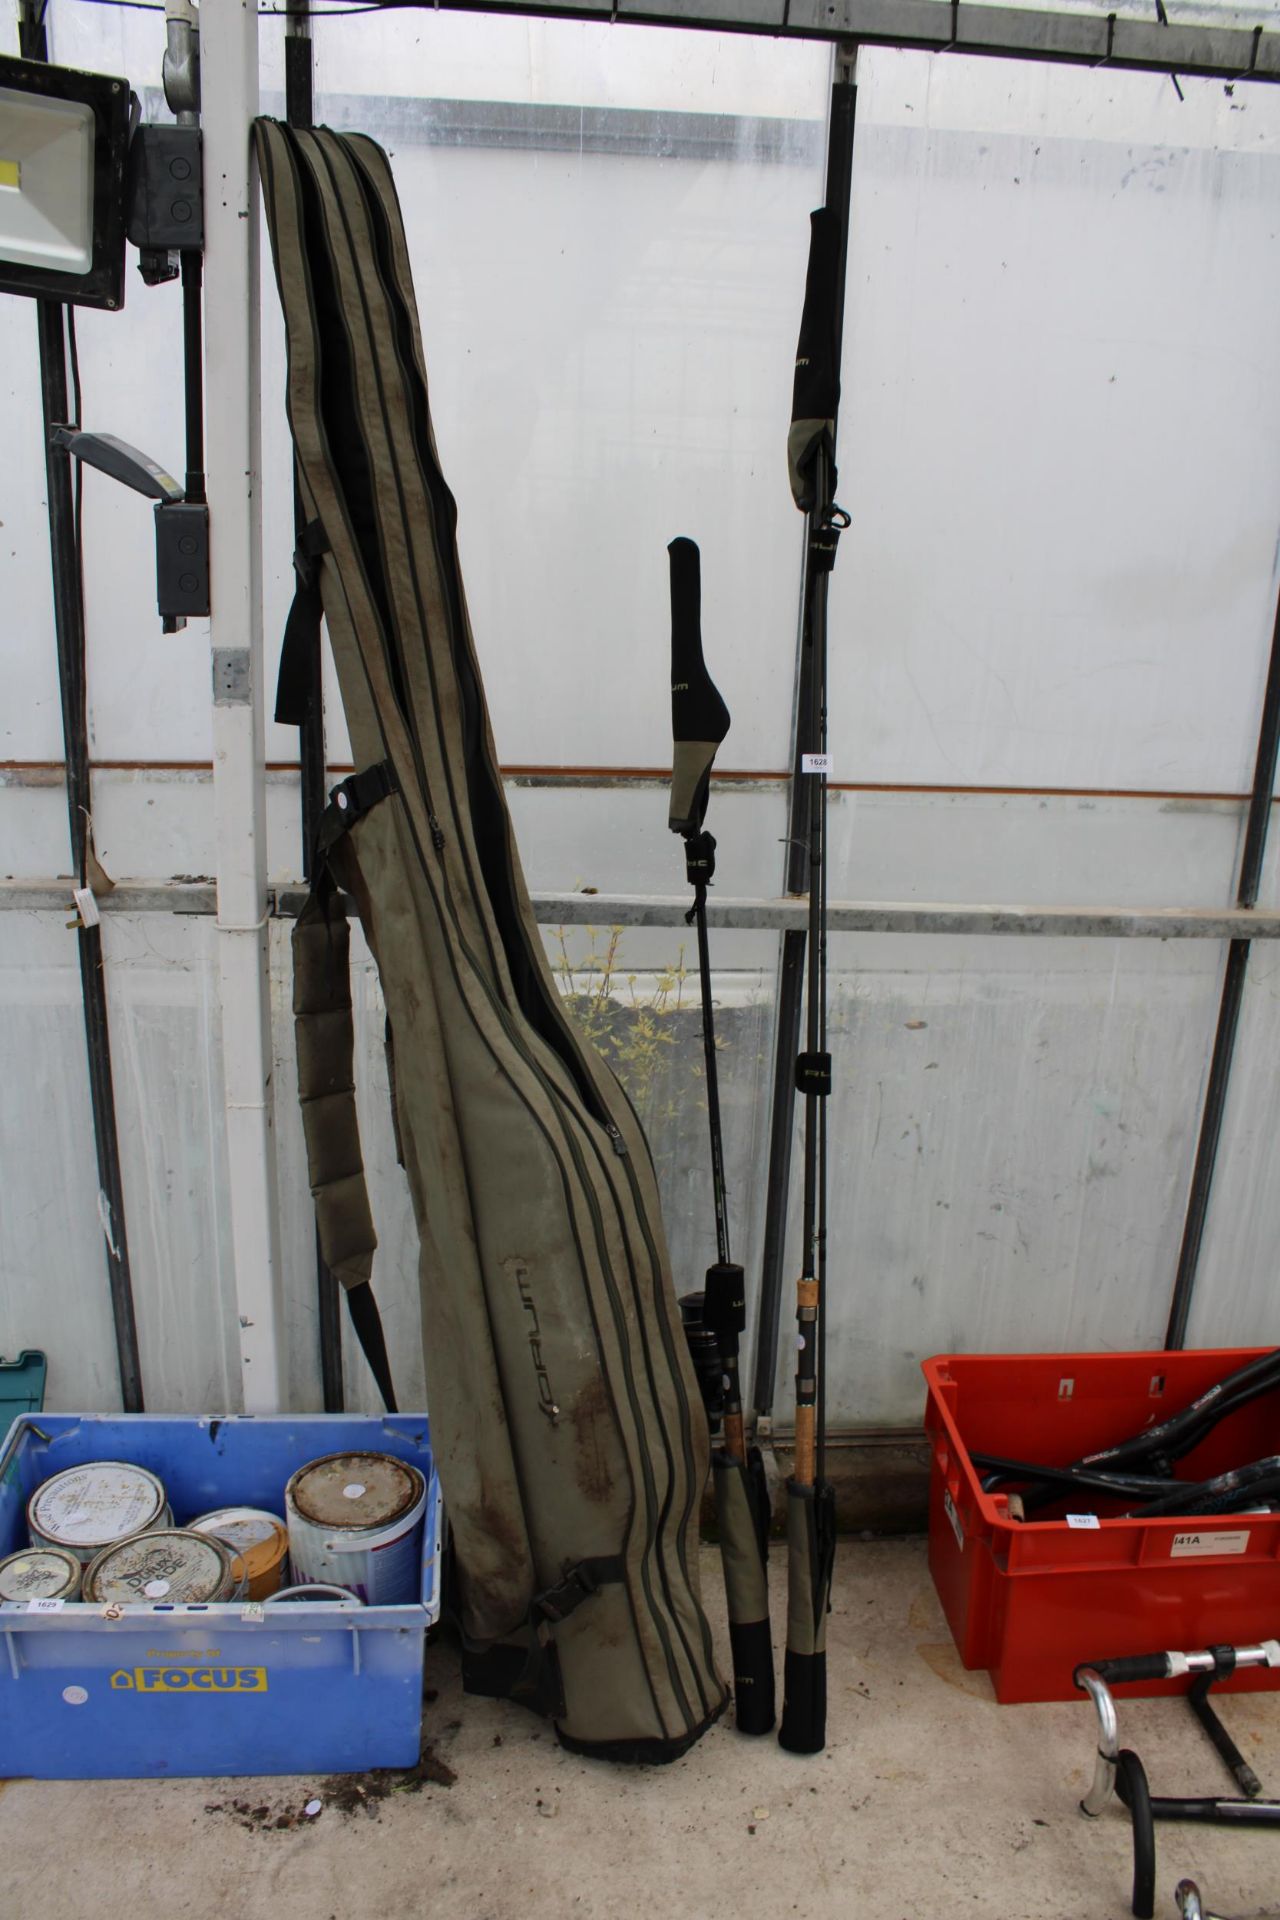 A ROD CARRYING BAG AND TWO VARIOUS FISHING RODS